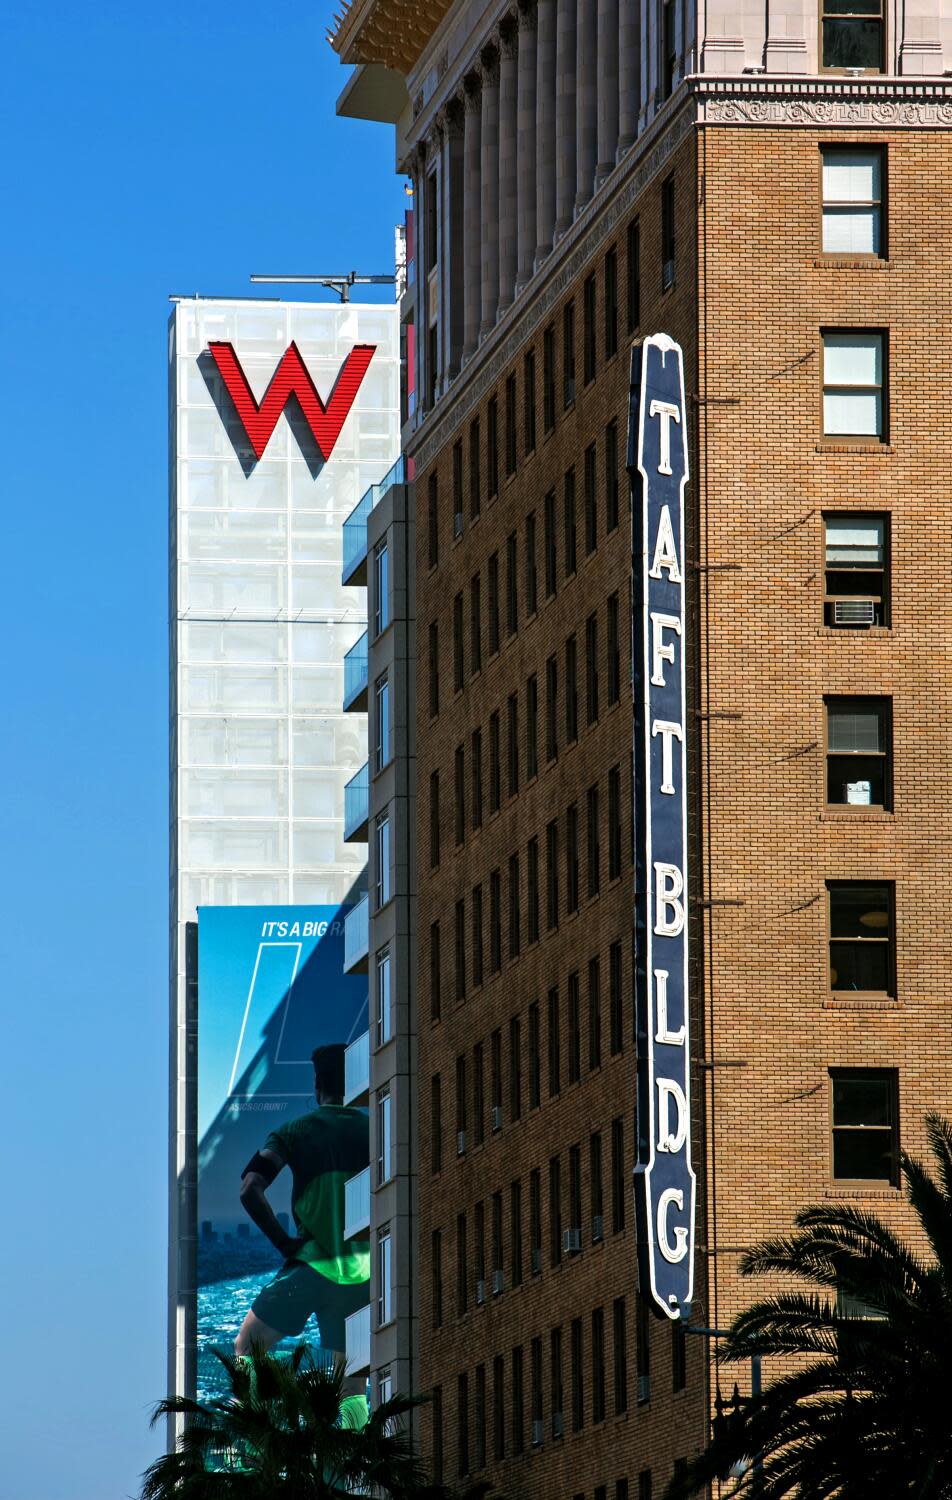 The exterior of the W Hotel on Hollywood Boulevard